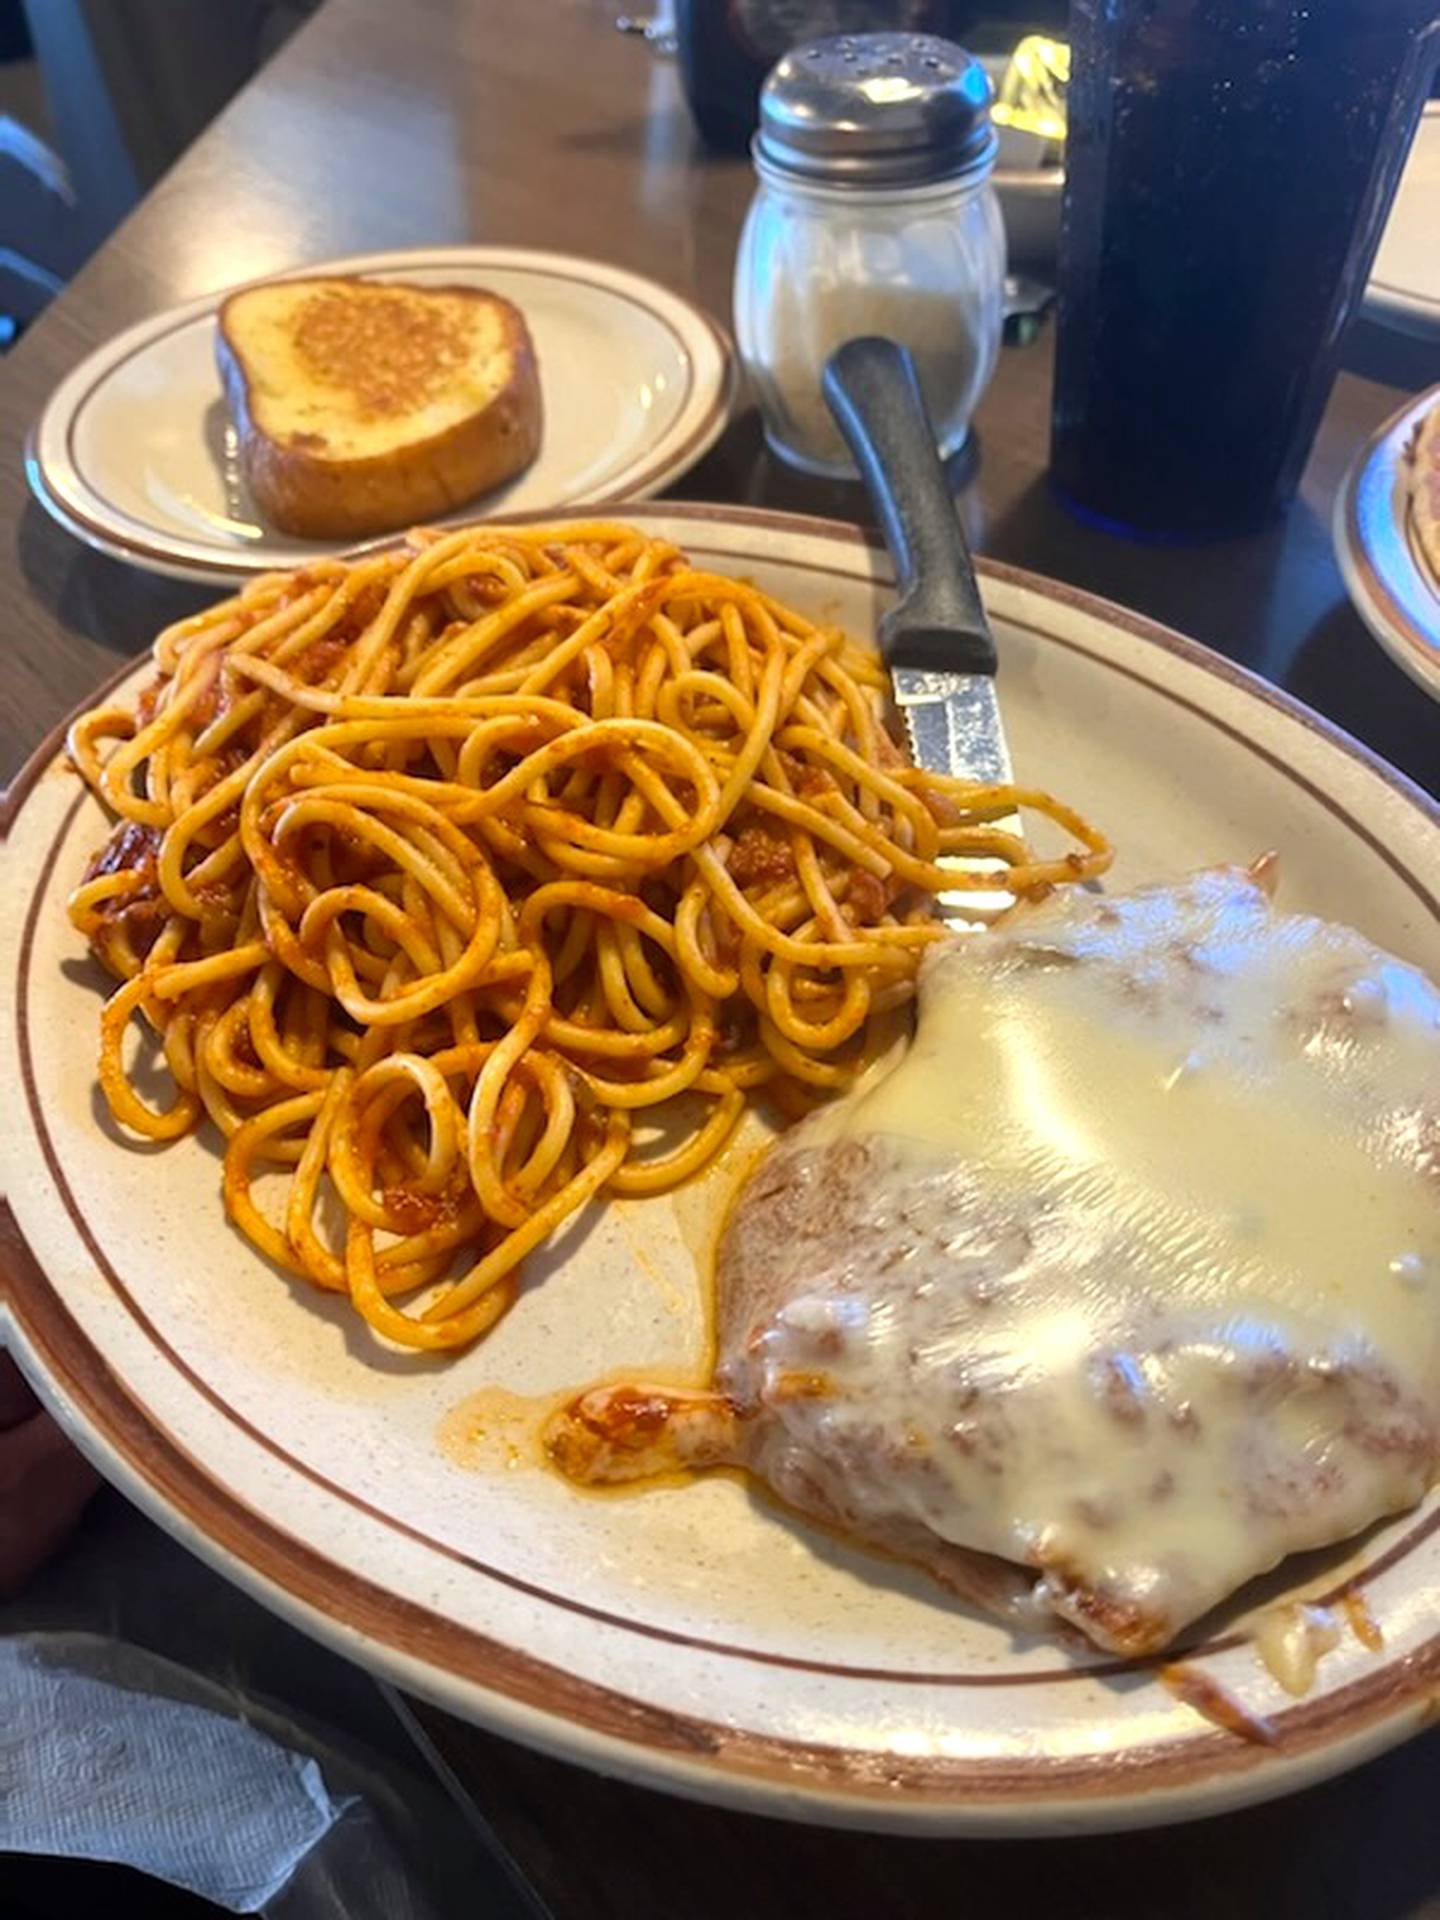 The chicken parmesan at the Coffee Cup in Princeton features a grilled chicken breast covered in sauce and cheese along with spaghetti and garlic bread.